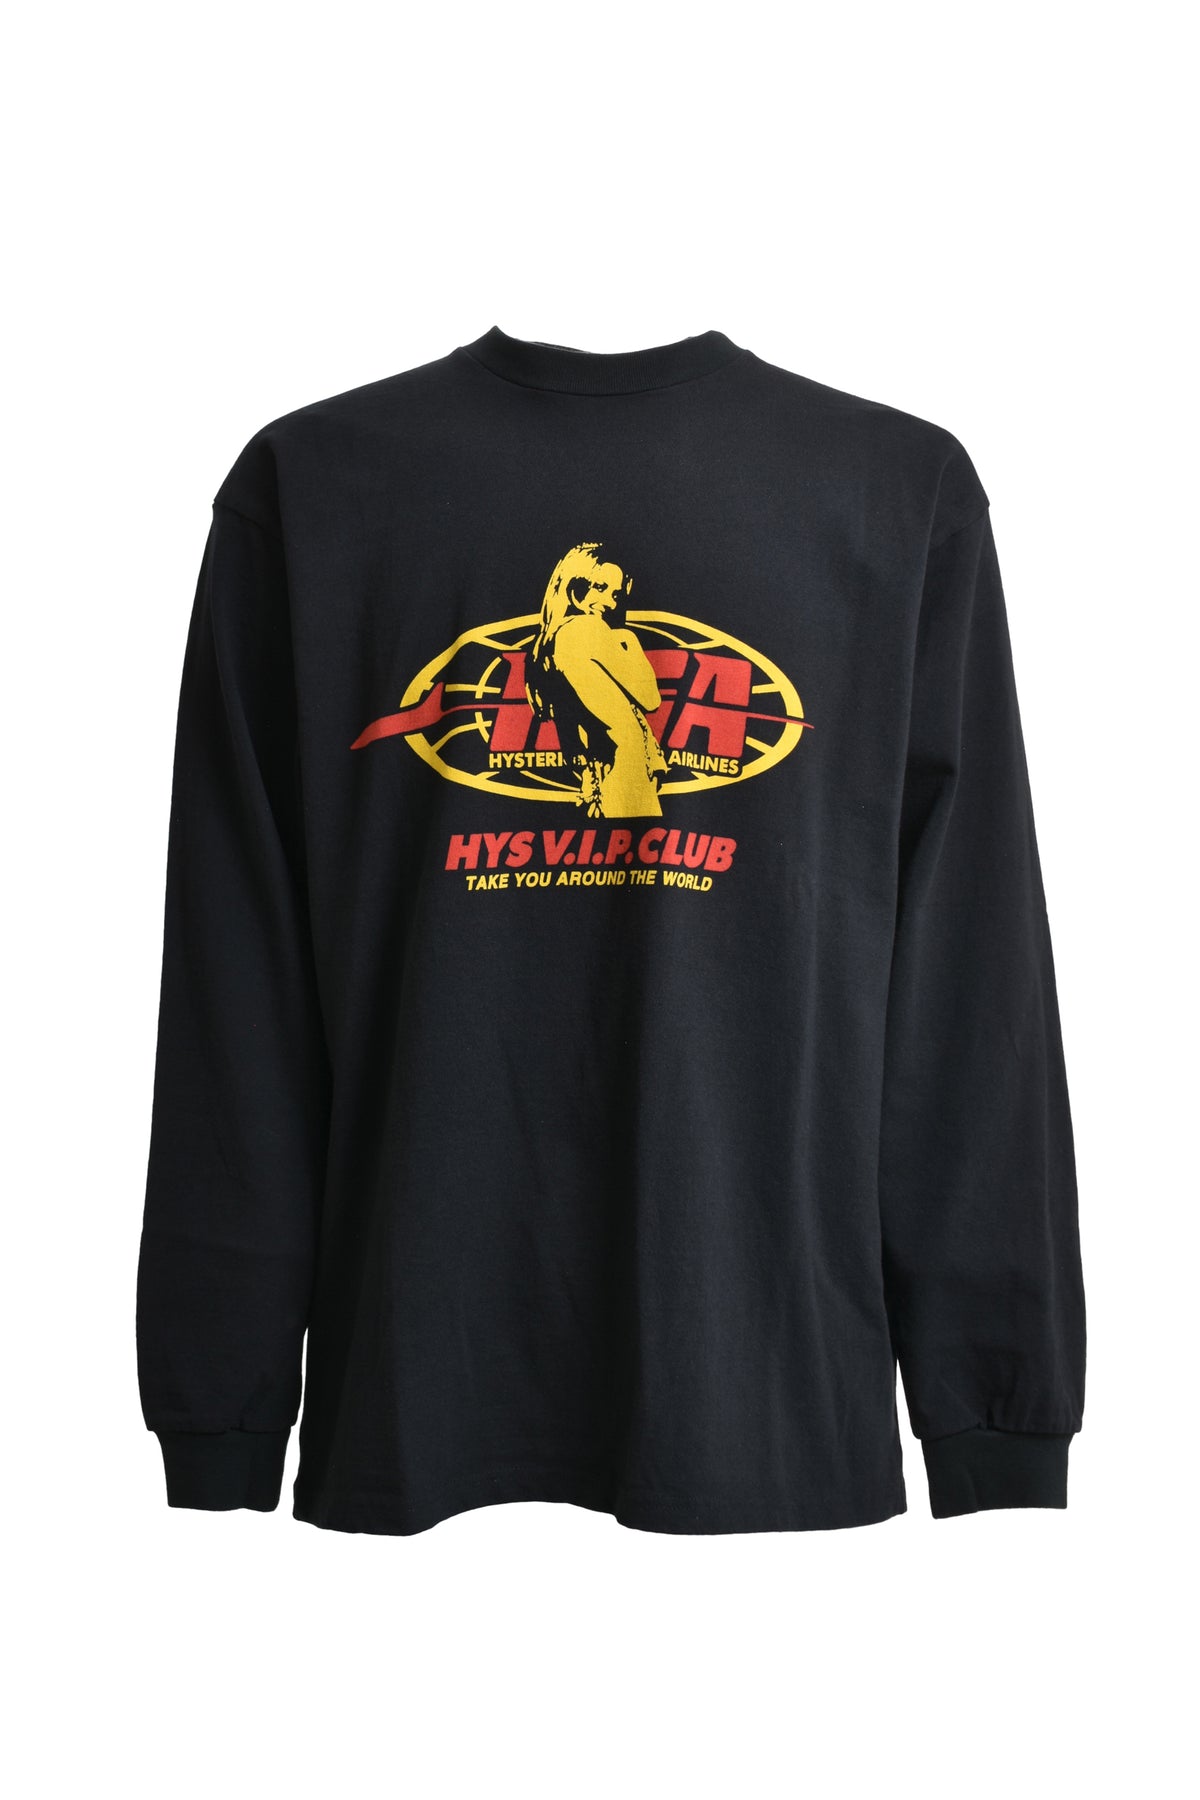 HYSTERIC AIRLINE LS T-SHIRTS / BLK